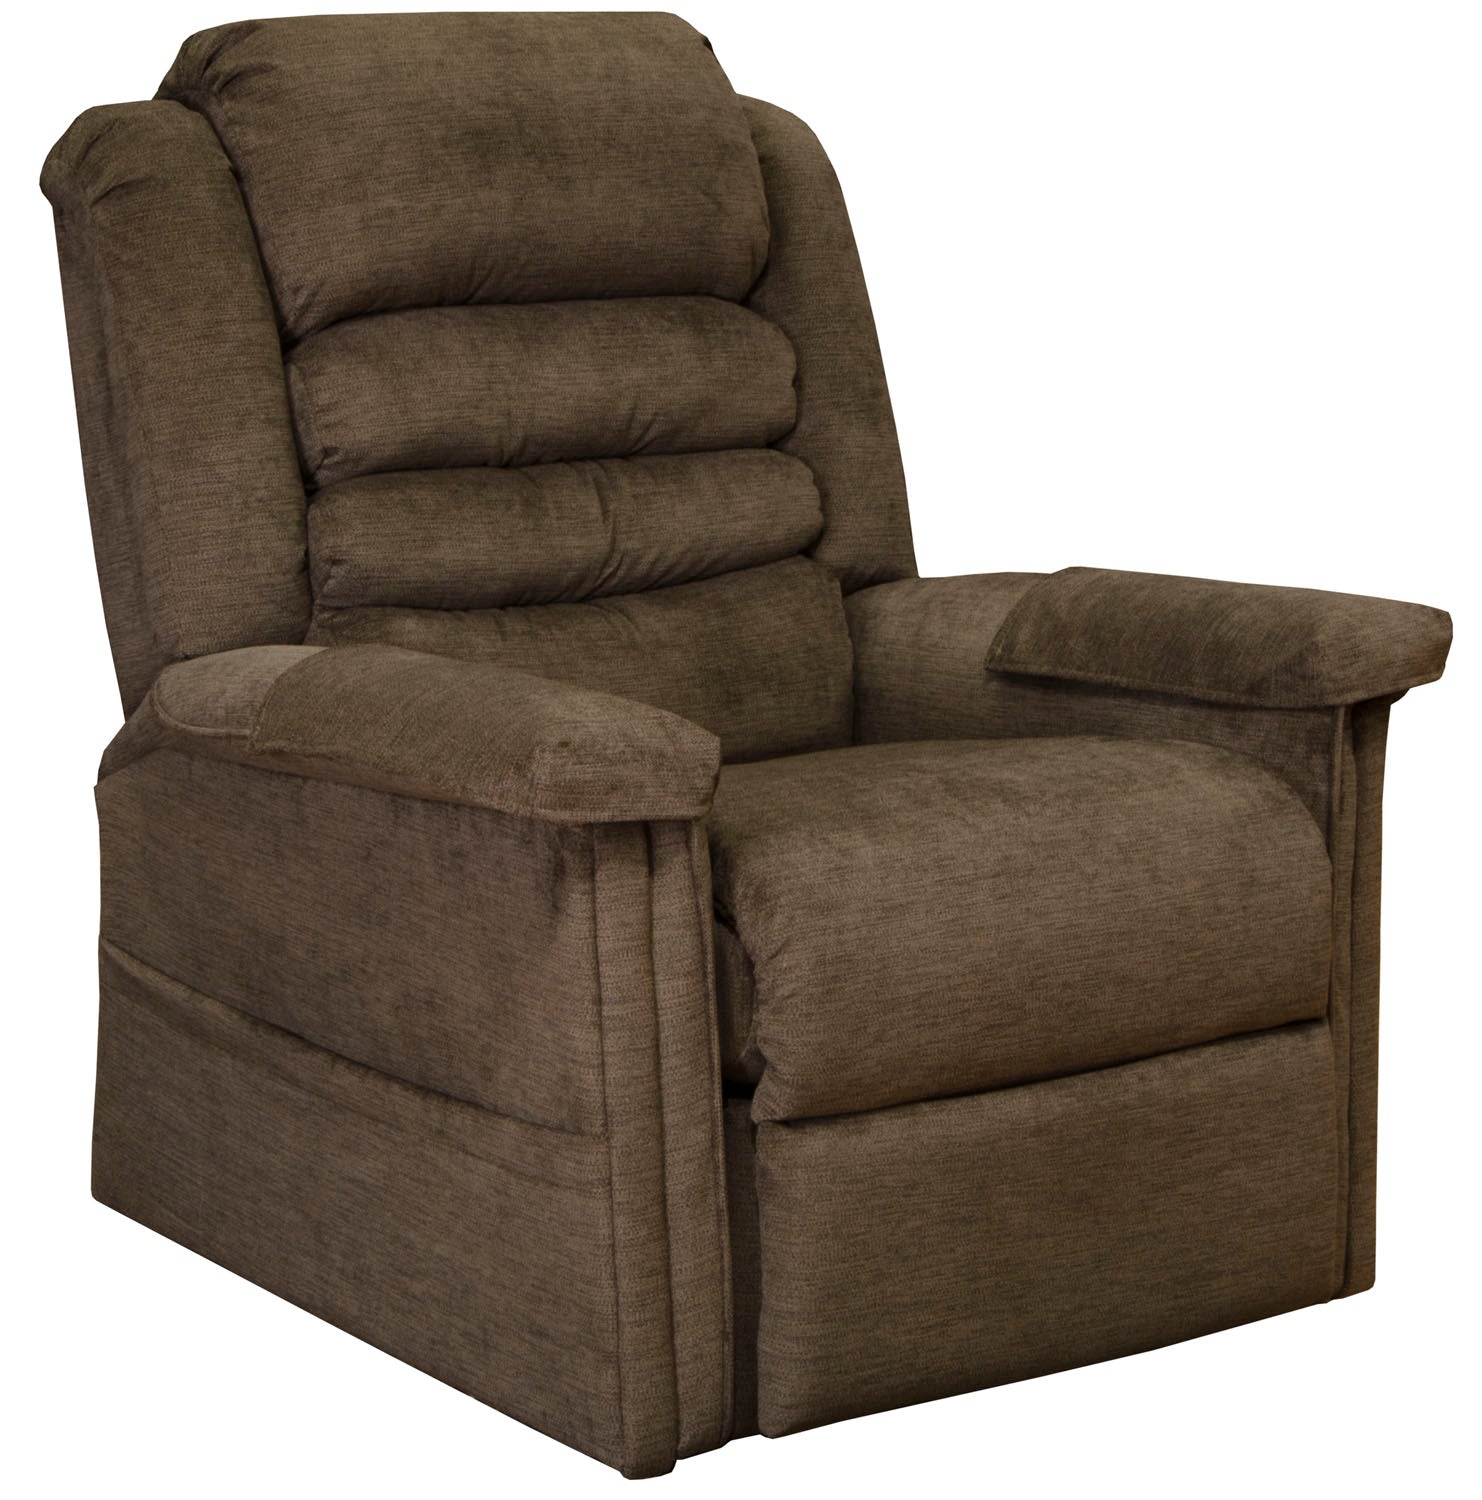 Catnapper Lay Flat Recliner | Power Lift Recliner Chairs - Lift and